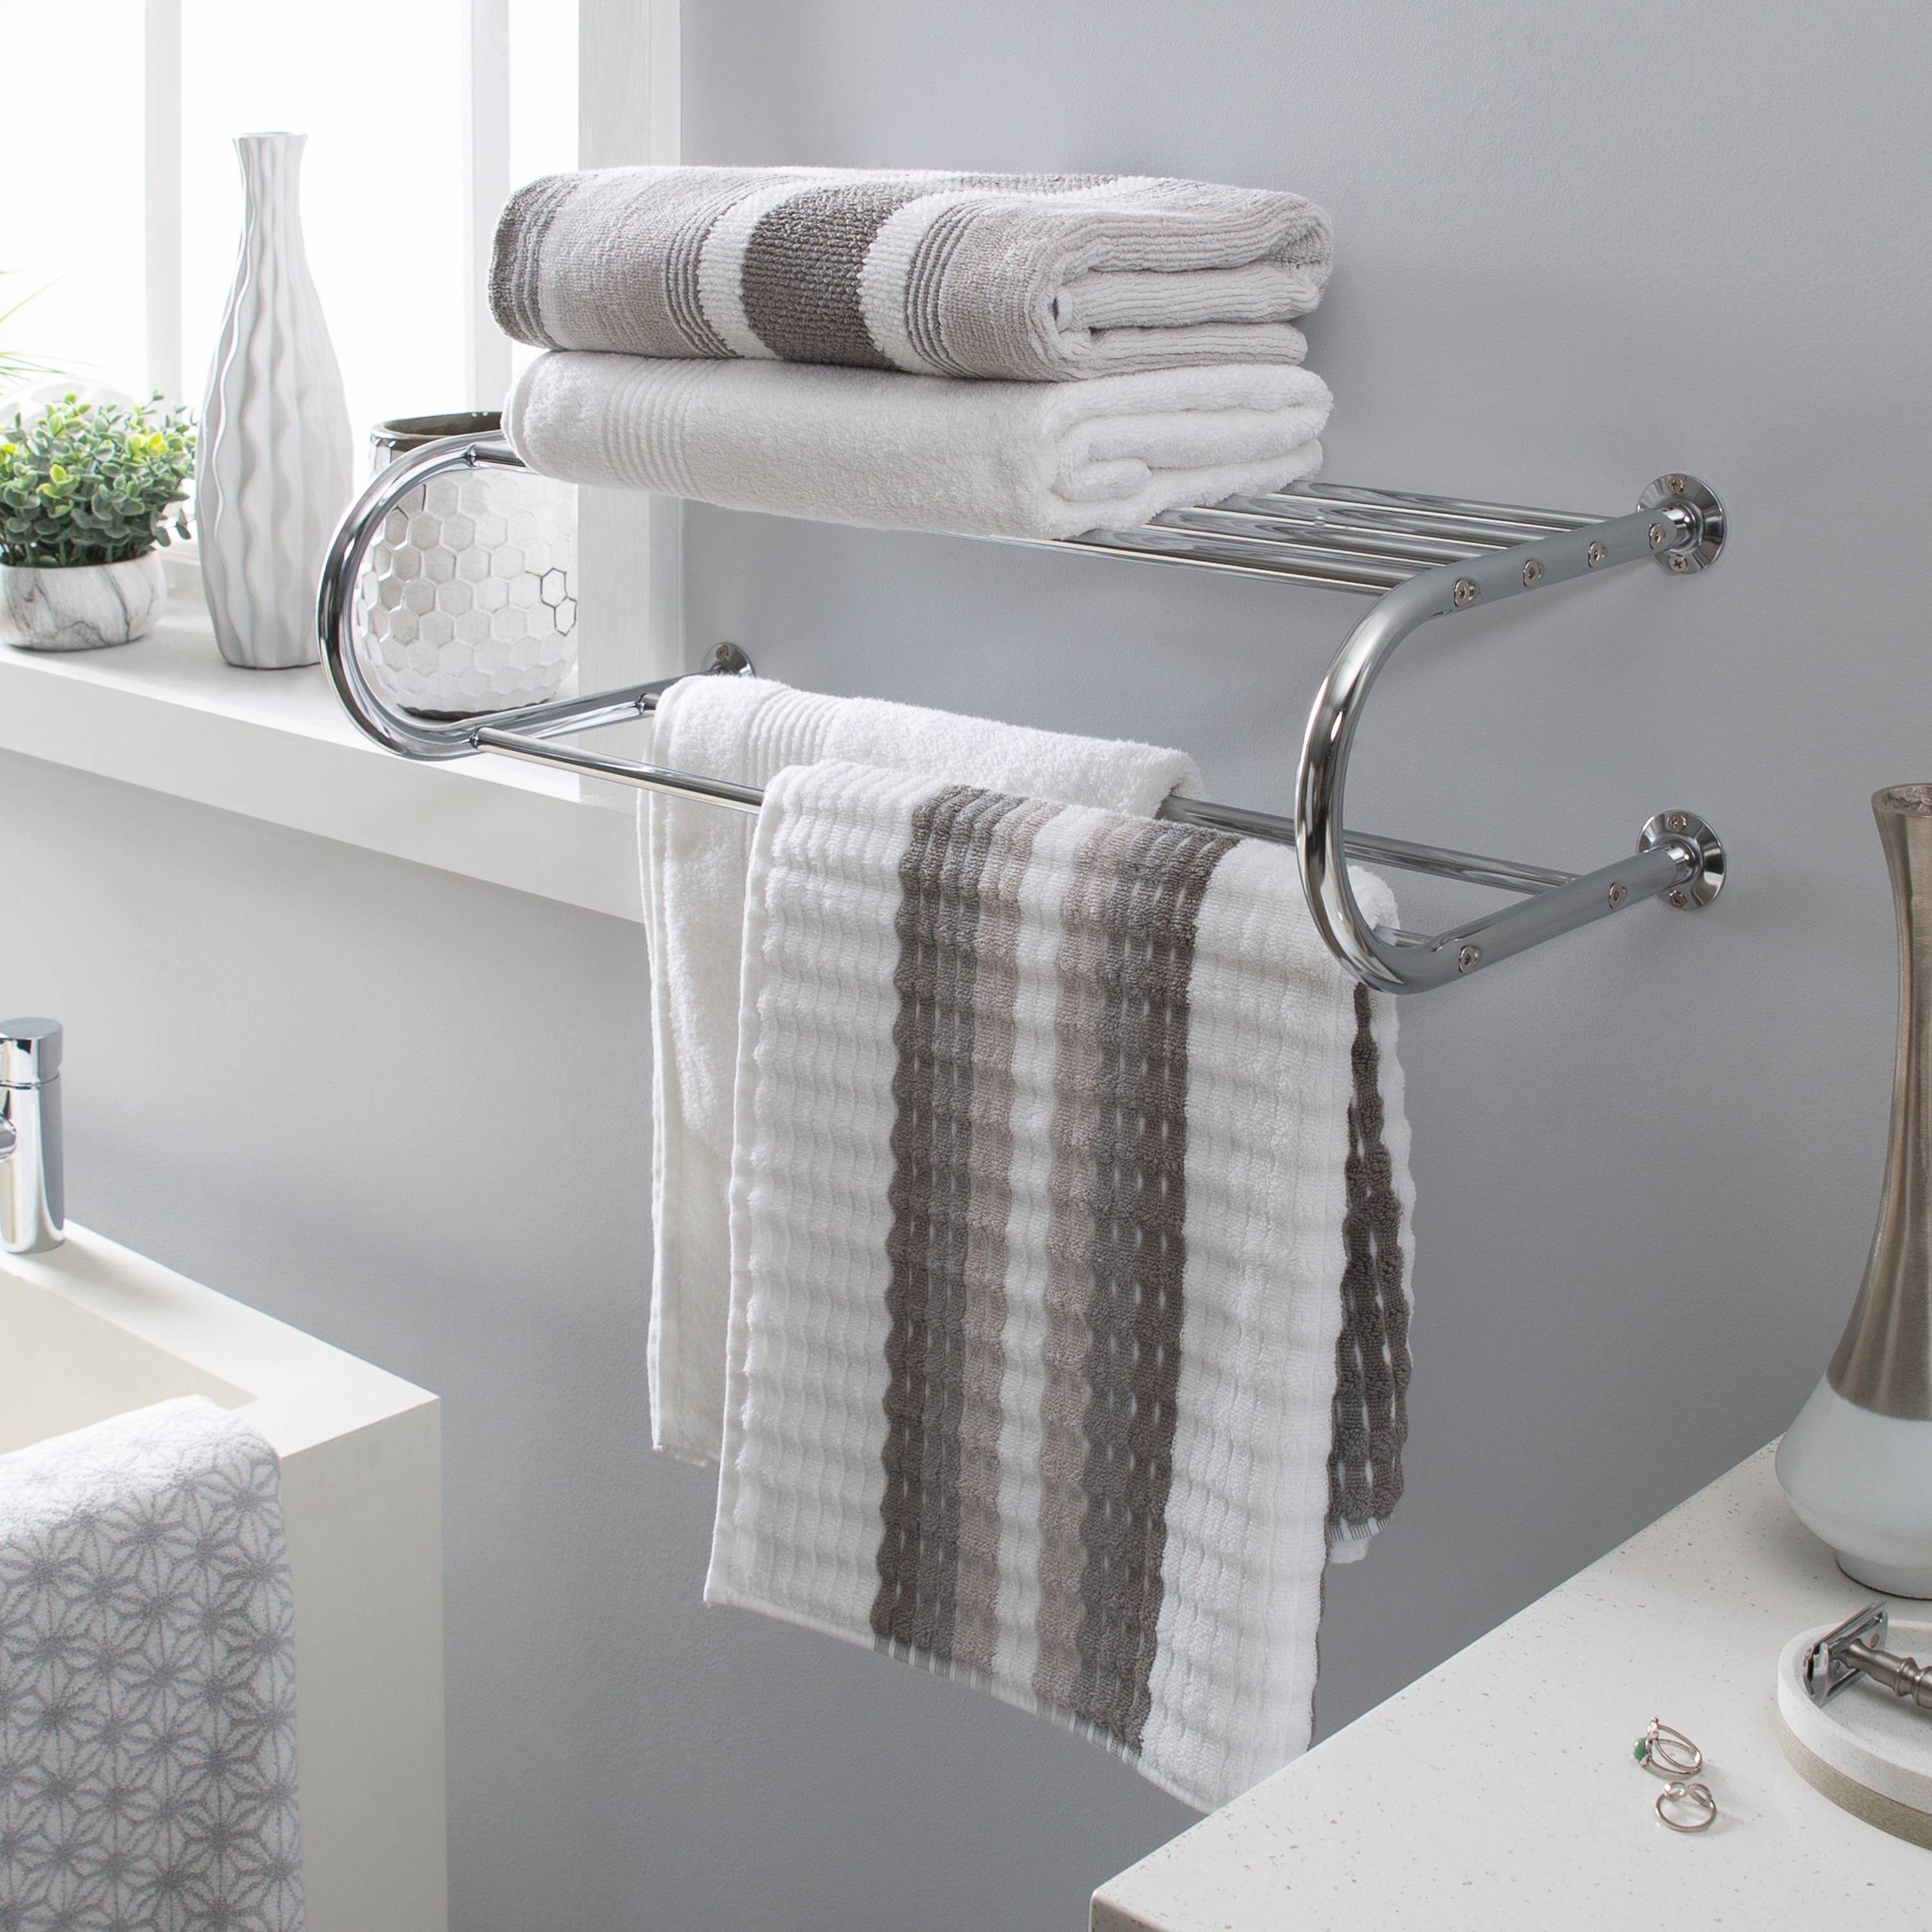 Organize It All Wall Mounted Bath Shelf with Towel Bar in Chrome - image 4 of 6